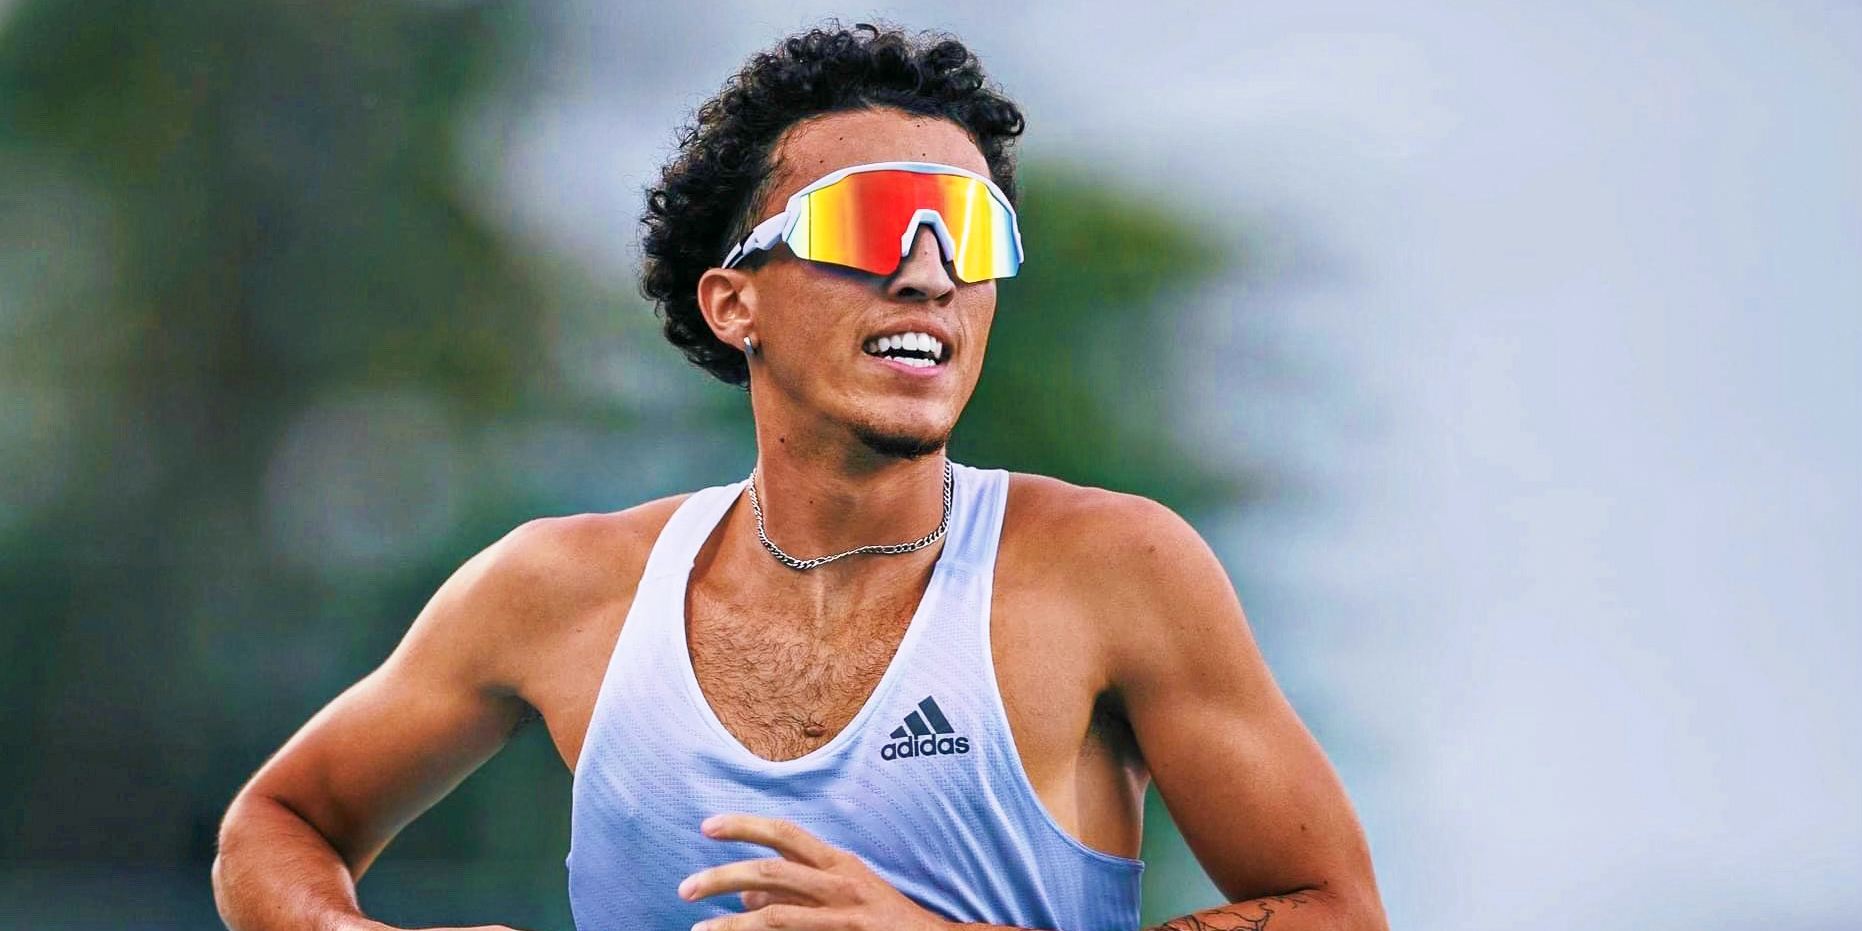 Man running in a track uniform with sunglasses